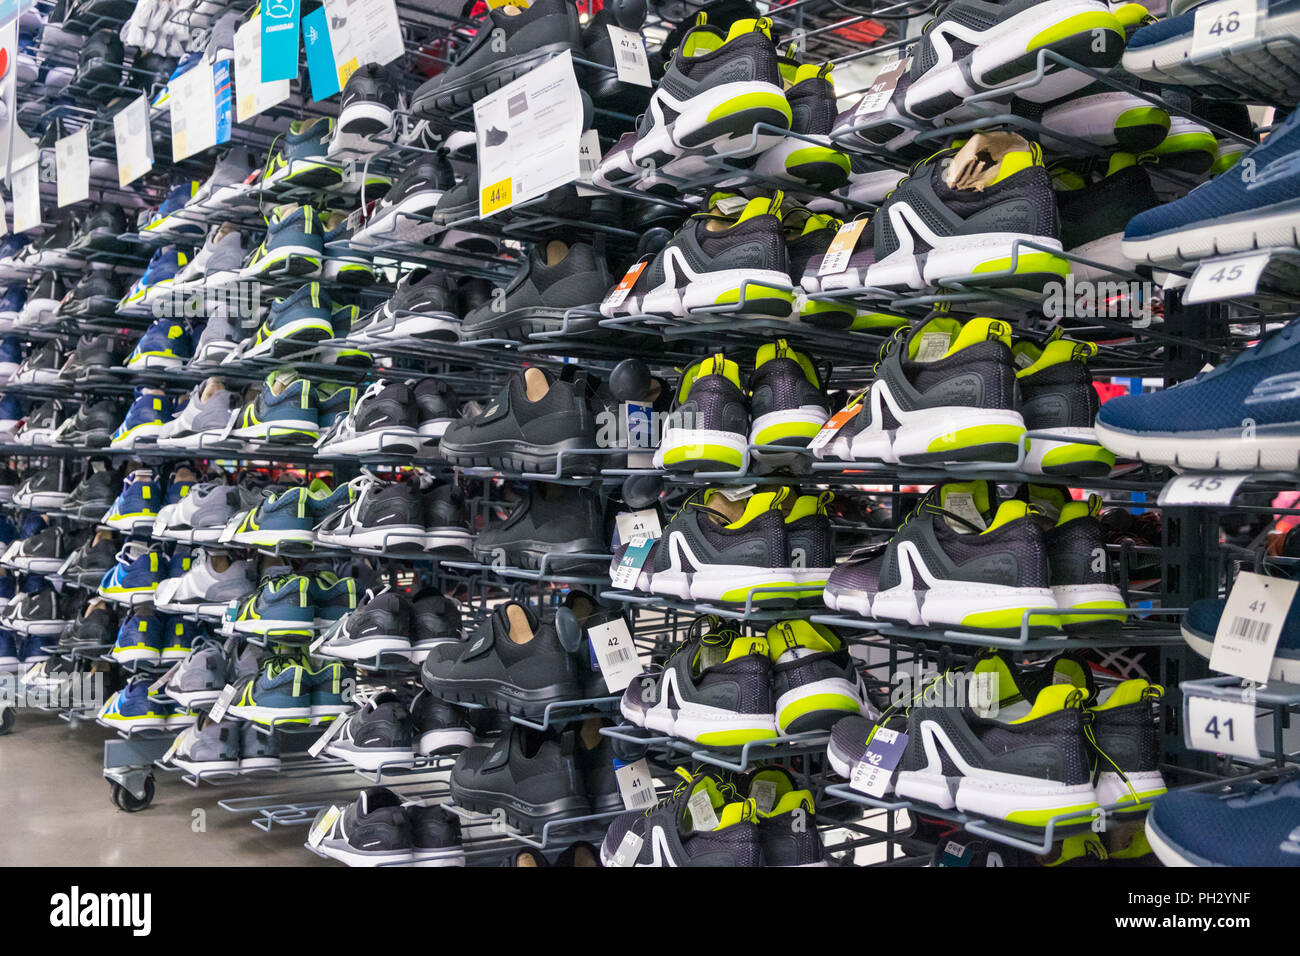 Trainers Shop Stock Photos & Trainers Shop Stock Images - Alamy